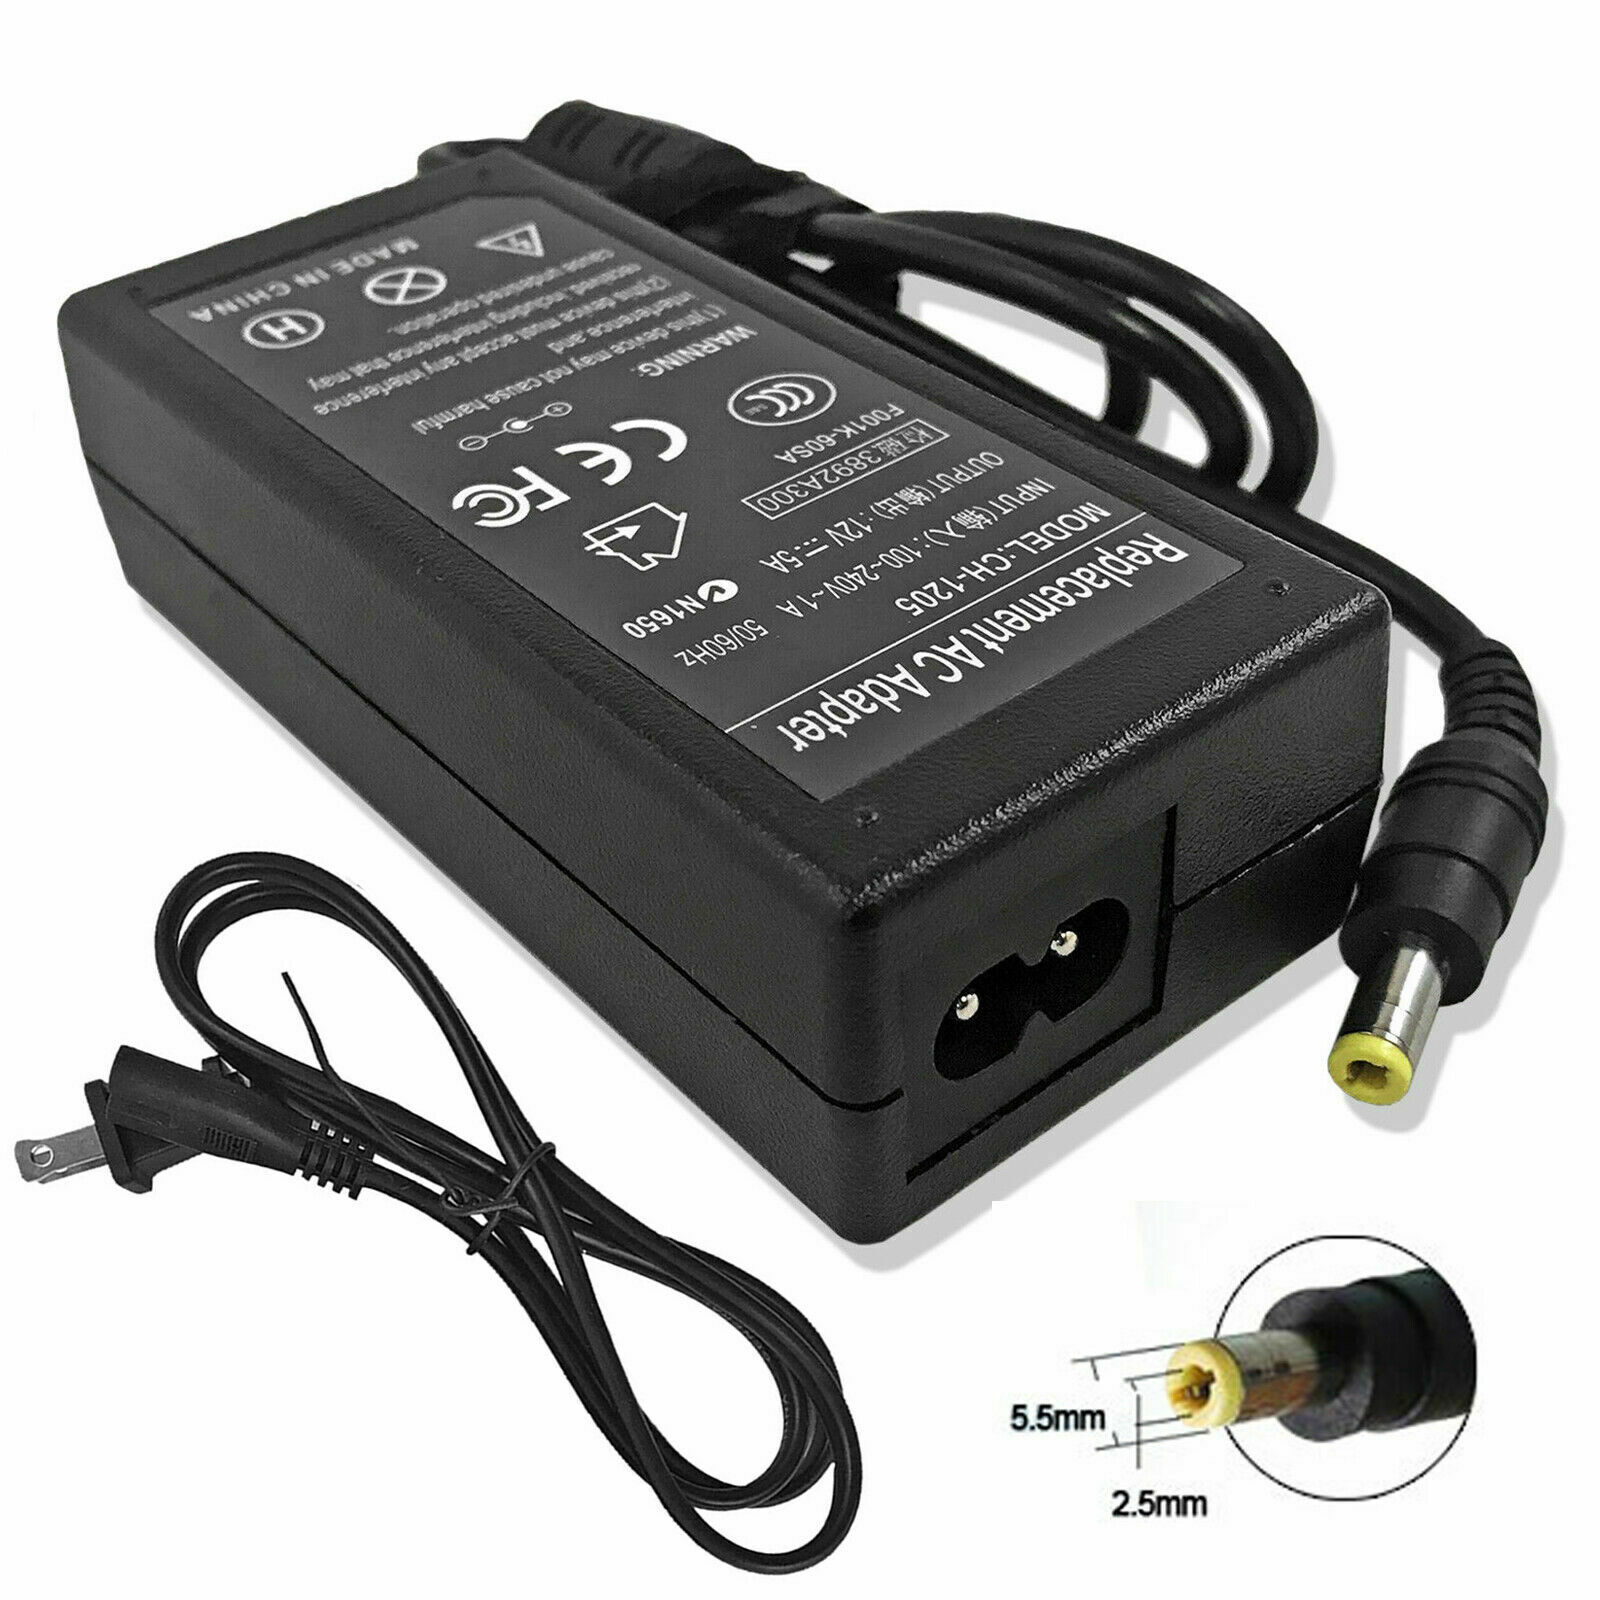 12V AC Adapter For Sirius Radio Boombox SUBX1 SUBX2 Charger Power Supply Cord Type: AC/DC Adapter MPN: Does Not App